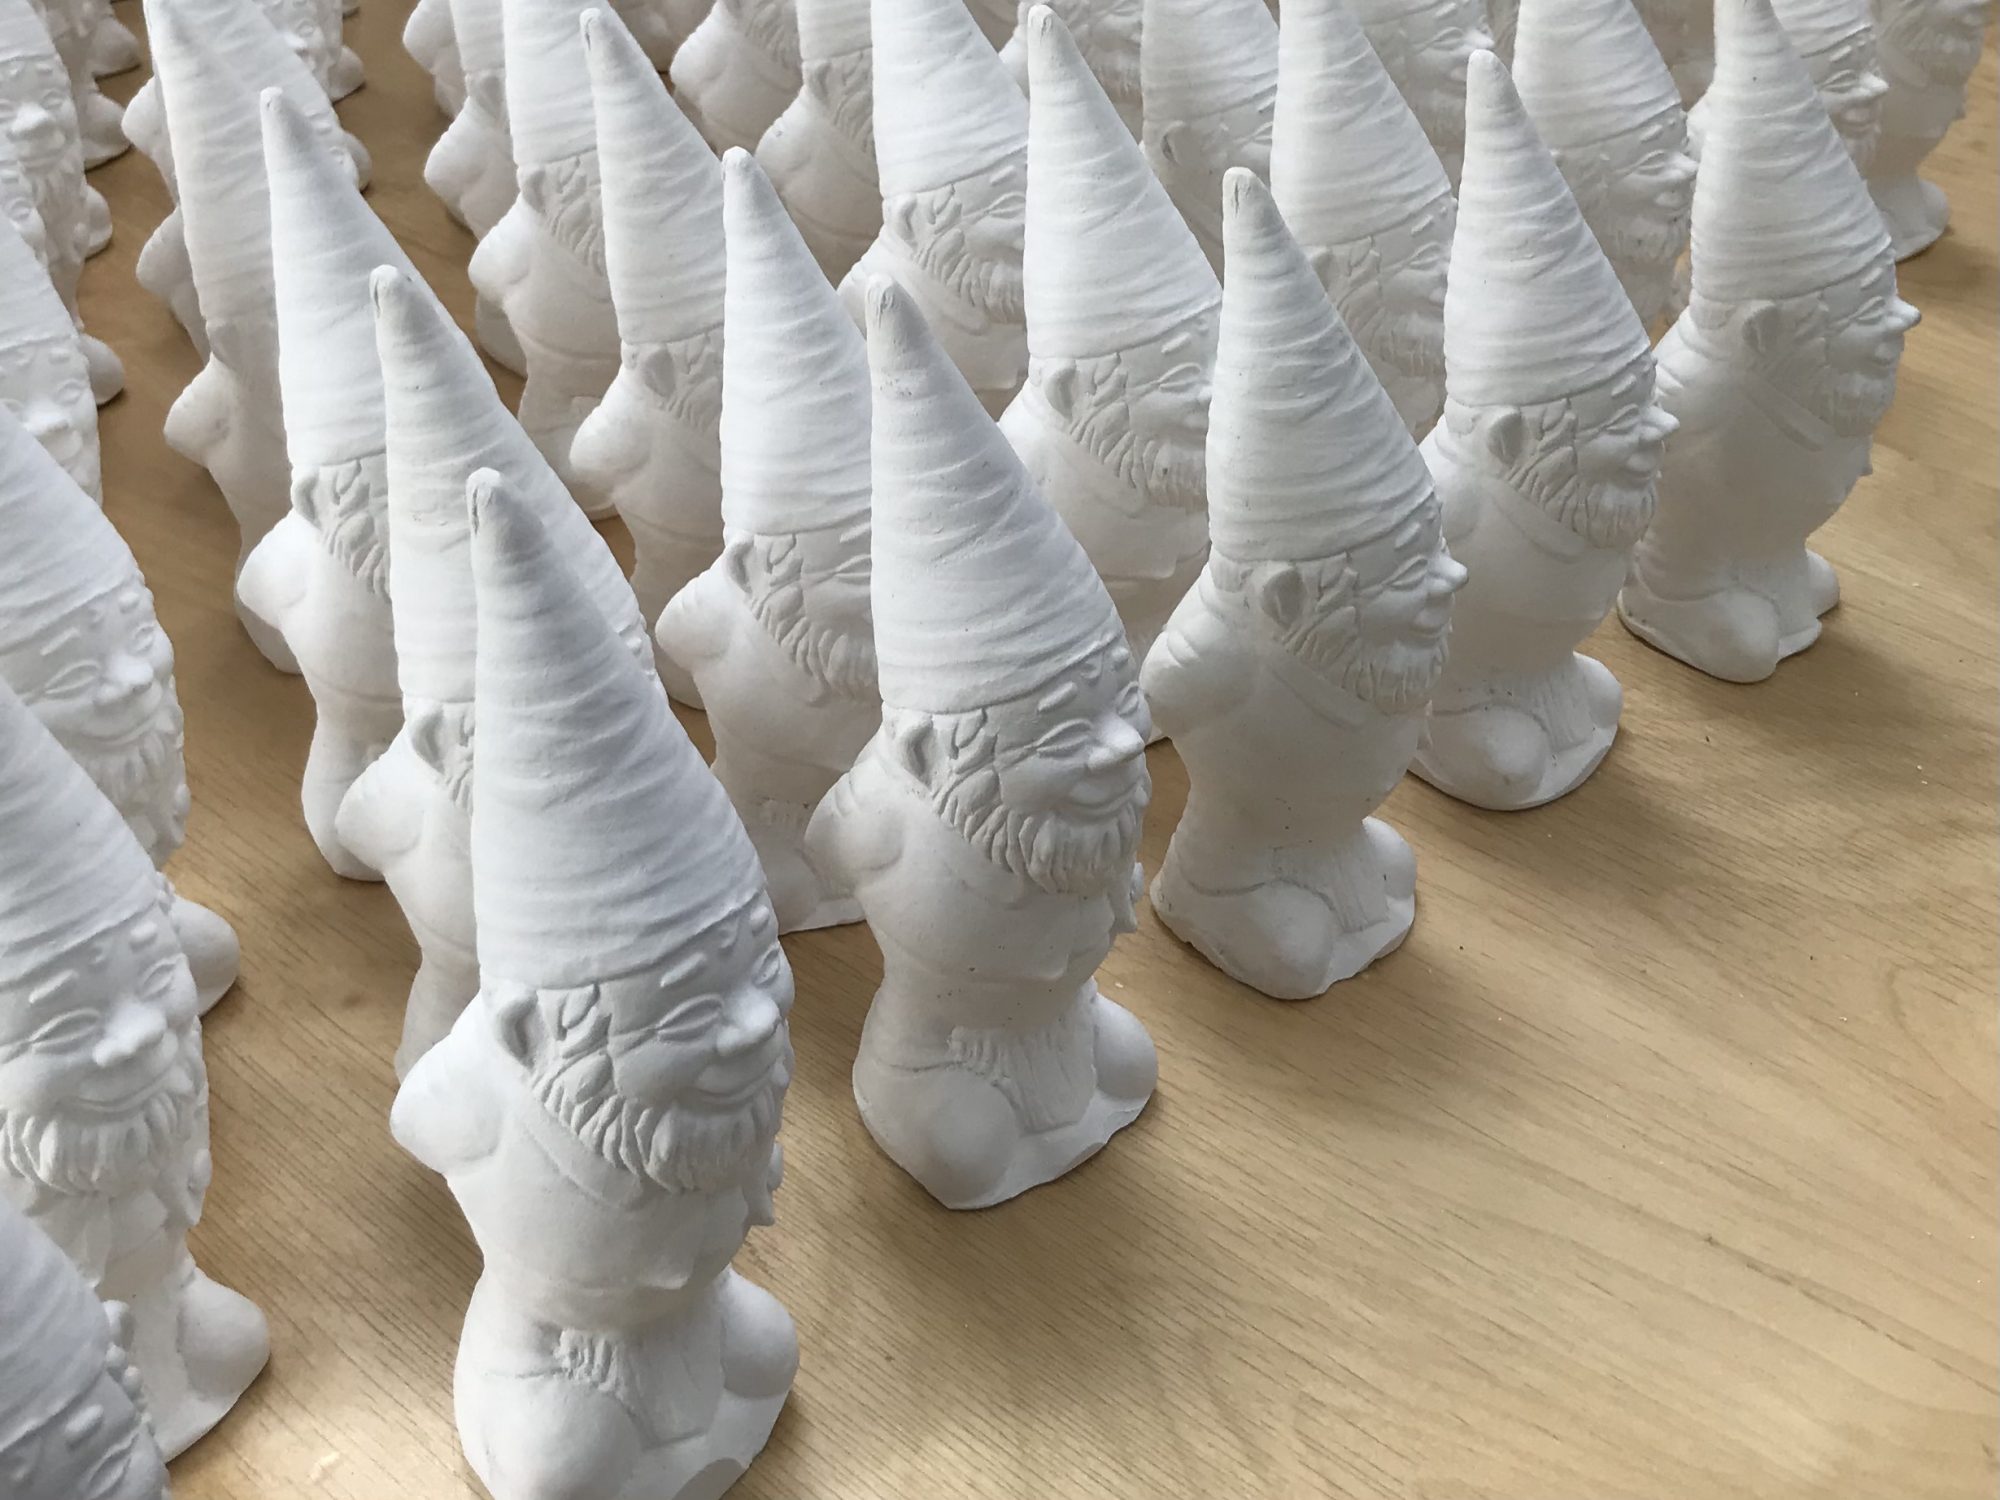 Rows of gnomes